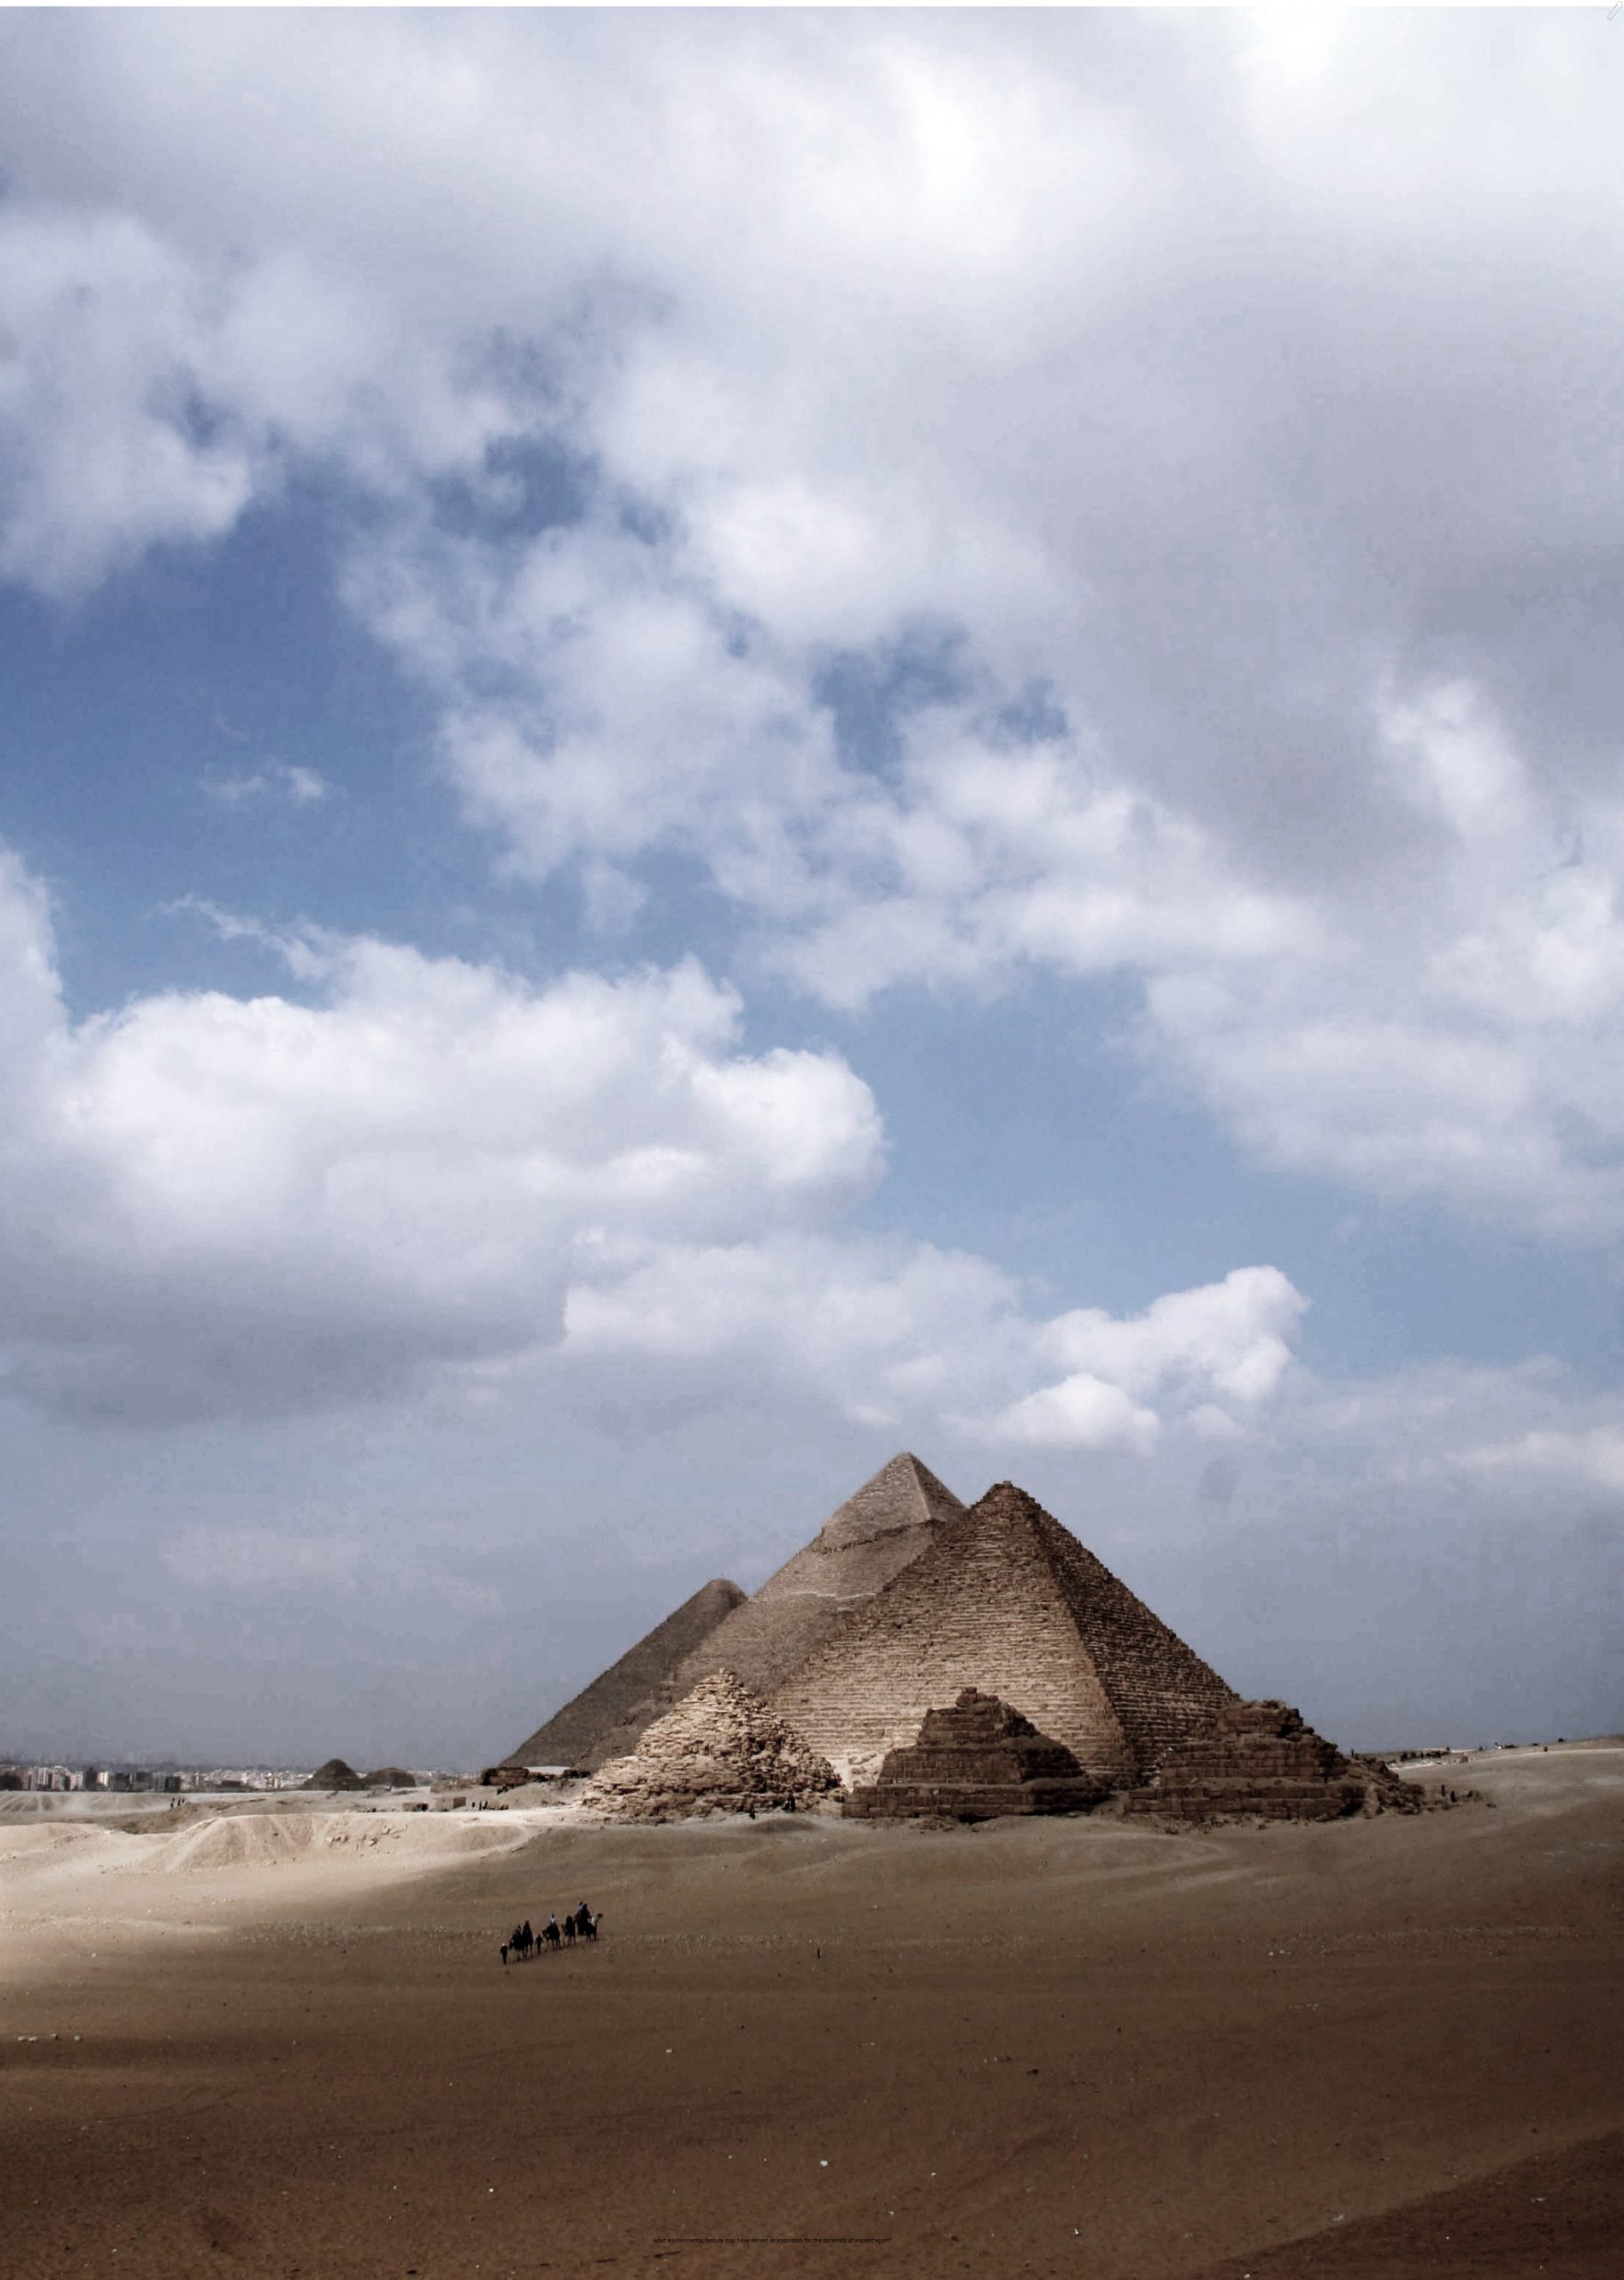 what environmental feature may have served as inspiration for the pyramids of ancient egypt? image